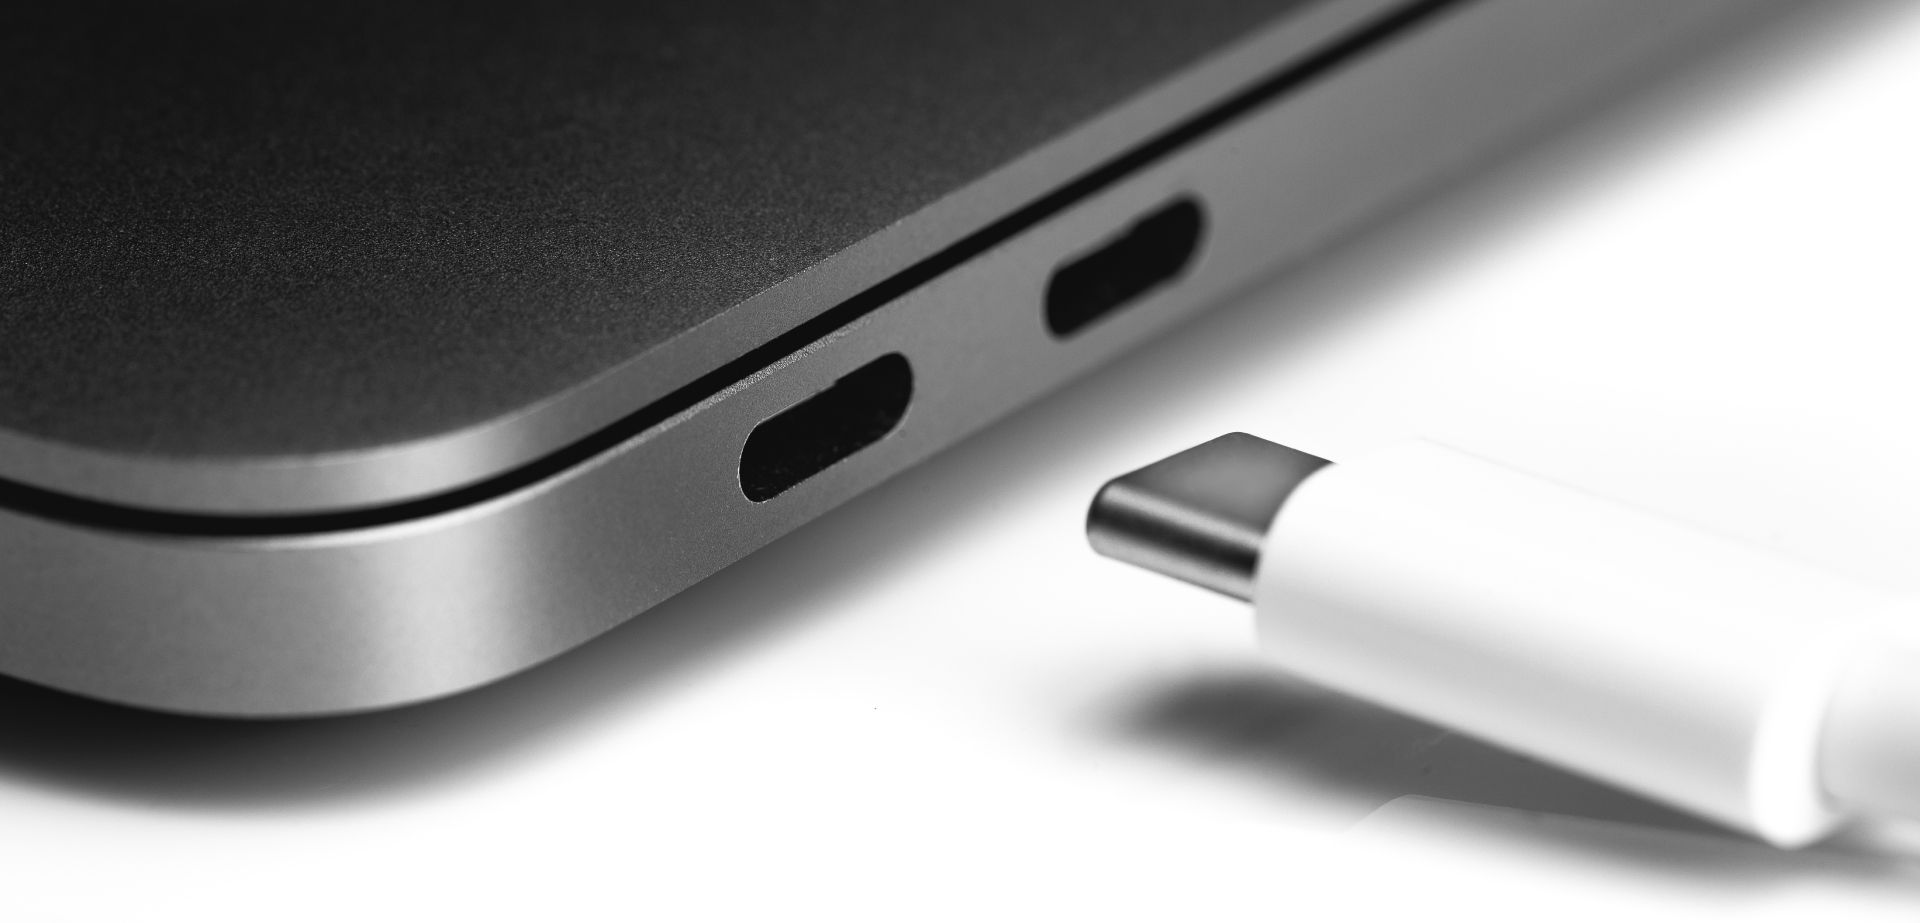 How to Find the Speed of All USB-C Ports on Your Mac